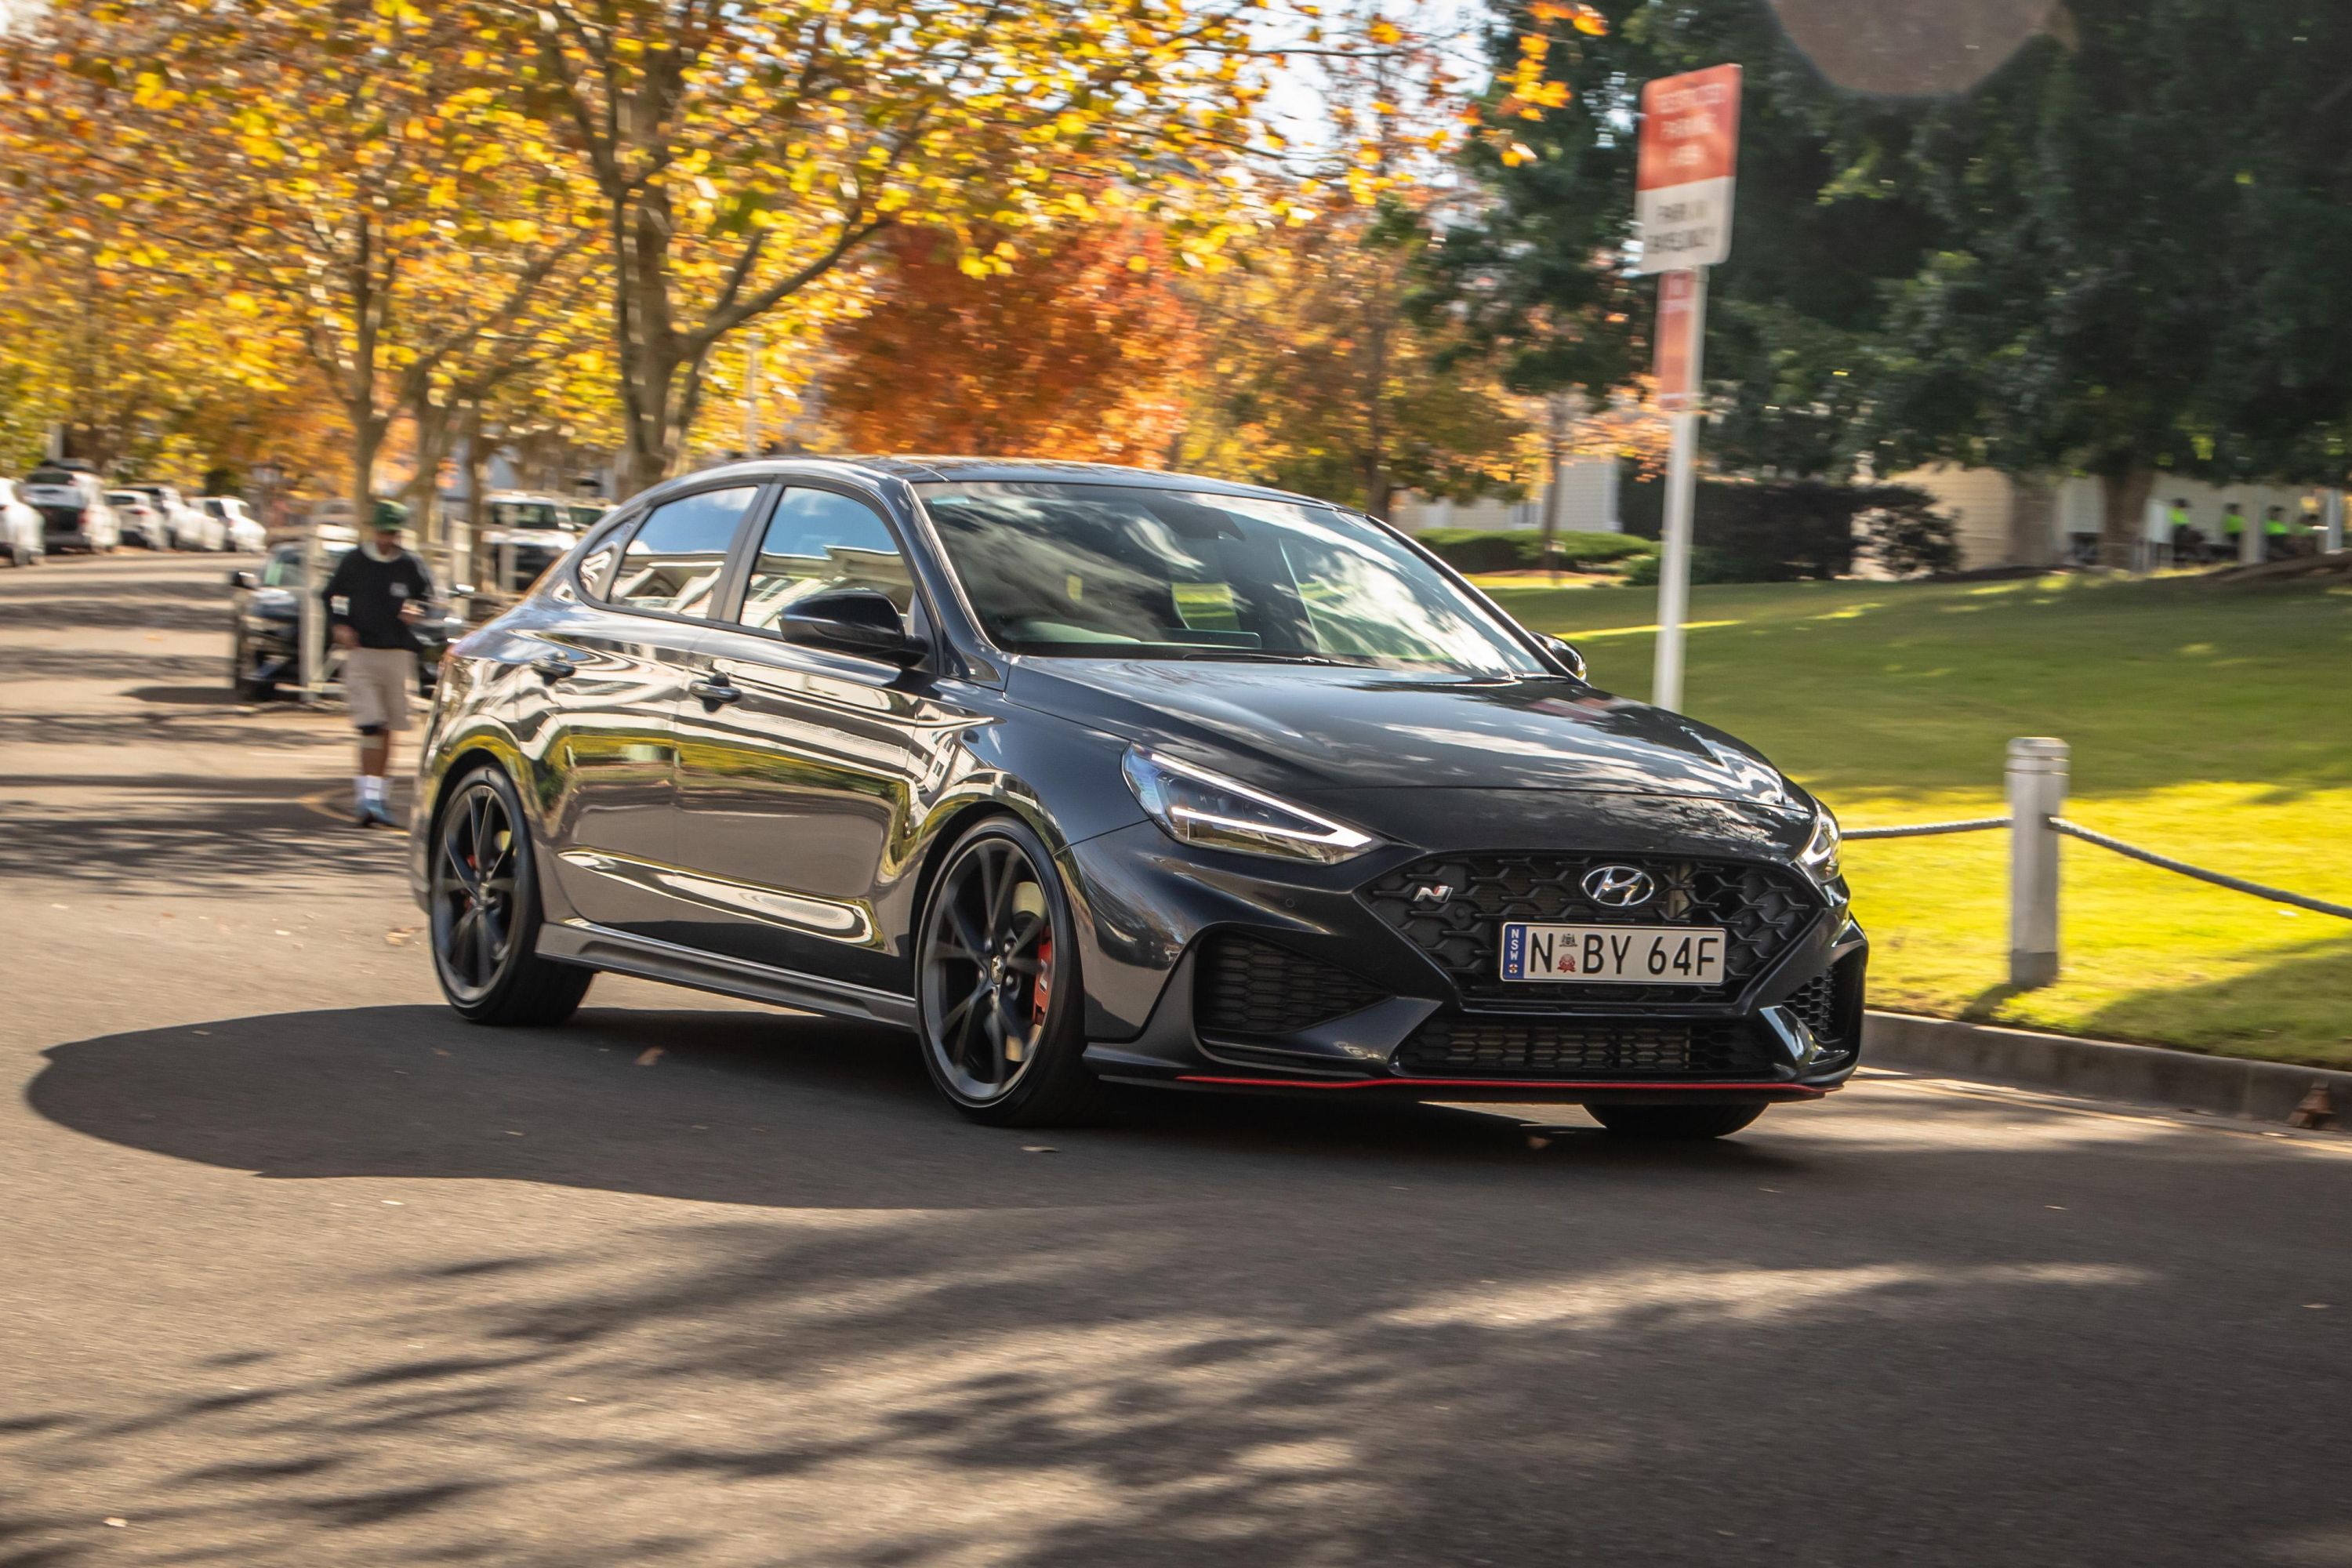 2021 Hyundai i30 Fastback N Limited Edition Capped At 500 Examples